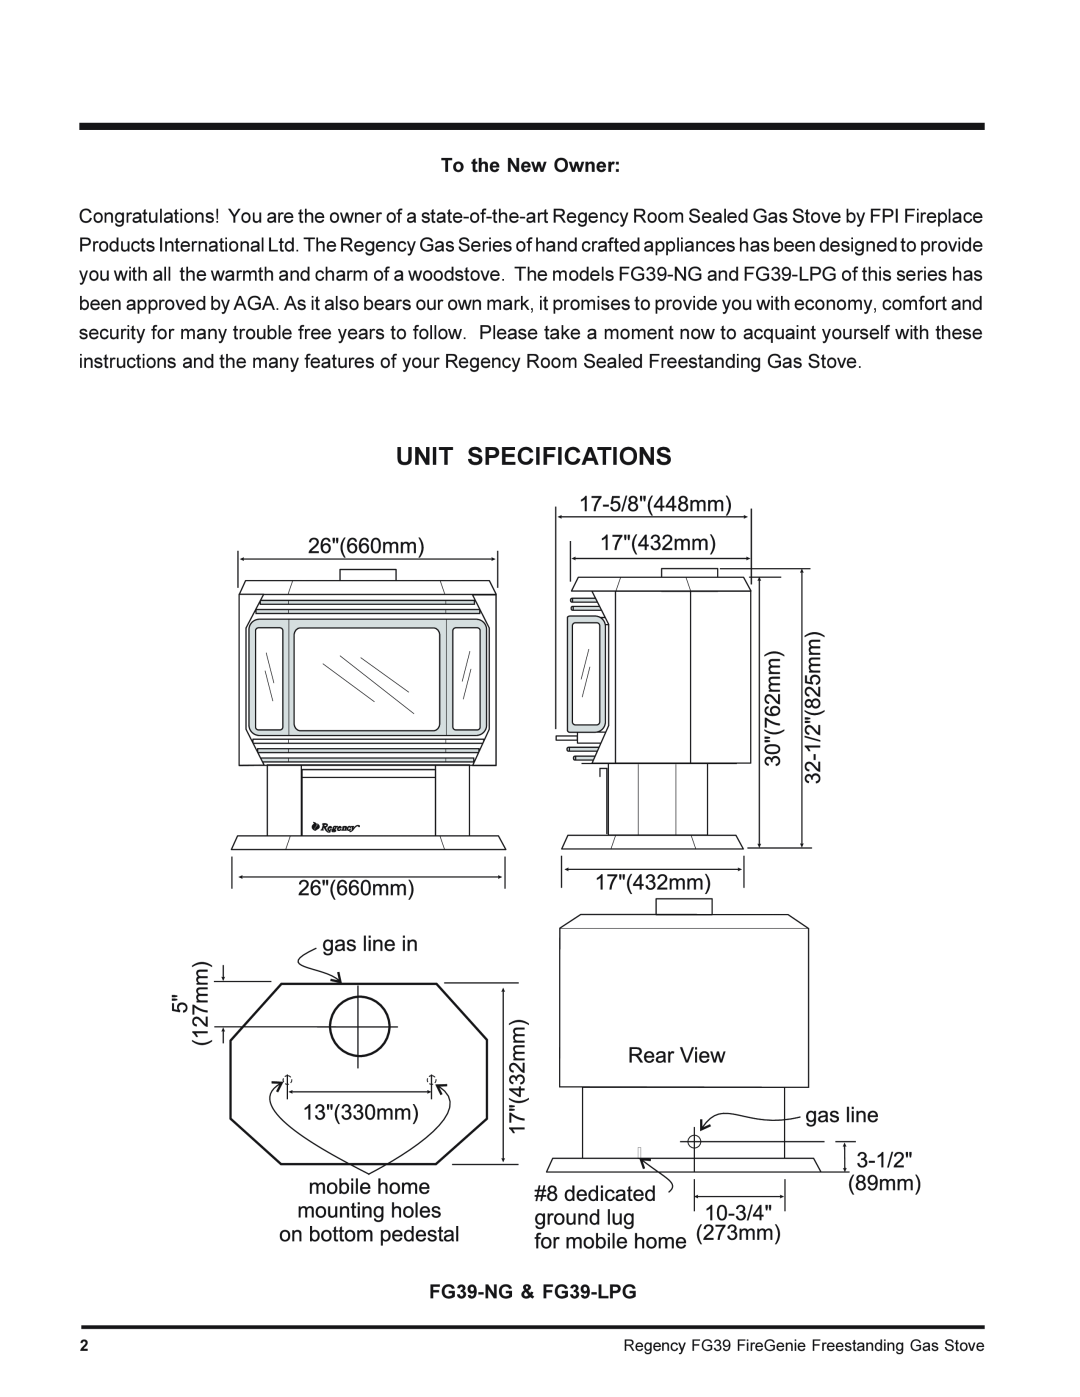 Regency installation manual Unit Specifications, To the New Owner, FG39-NG& FG39-LPG 